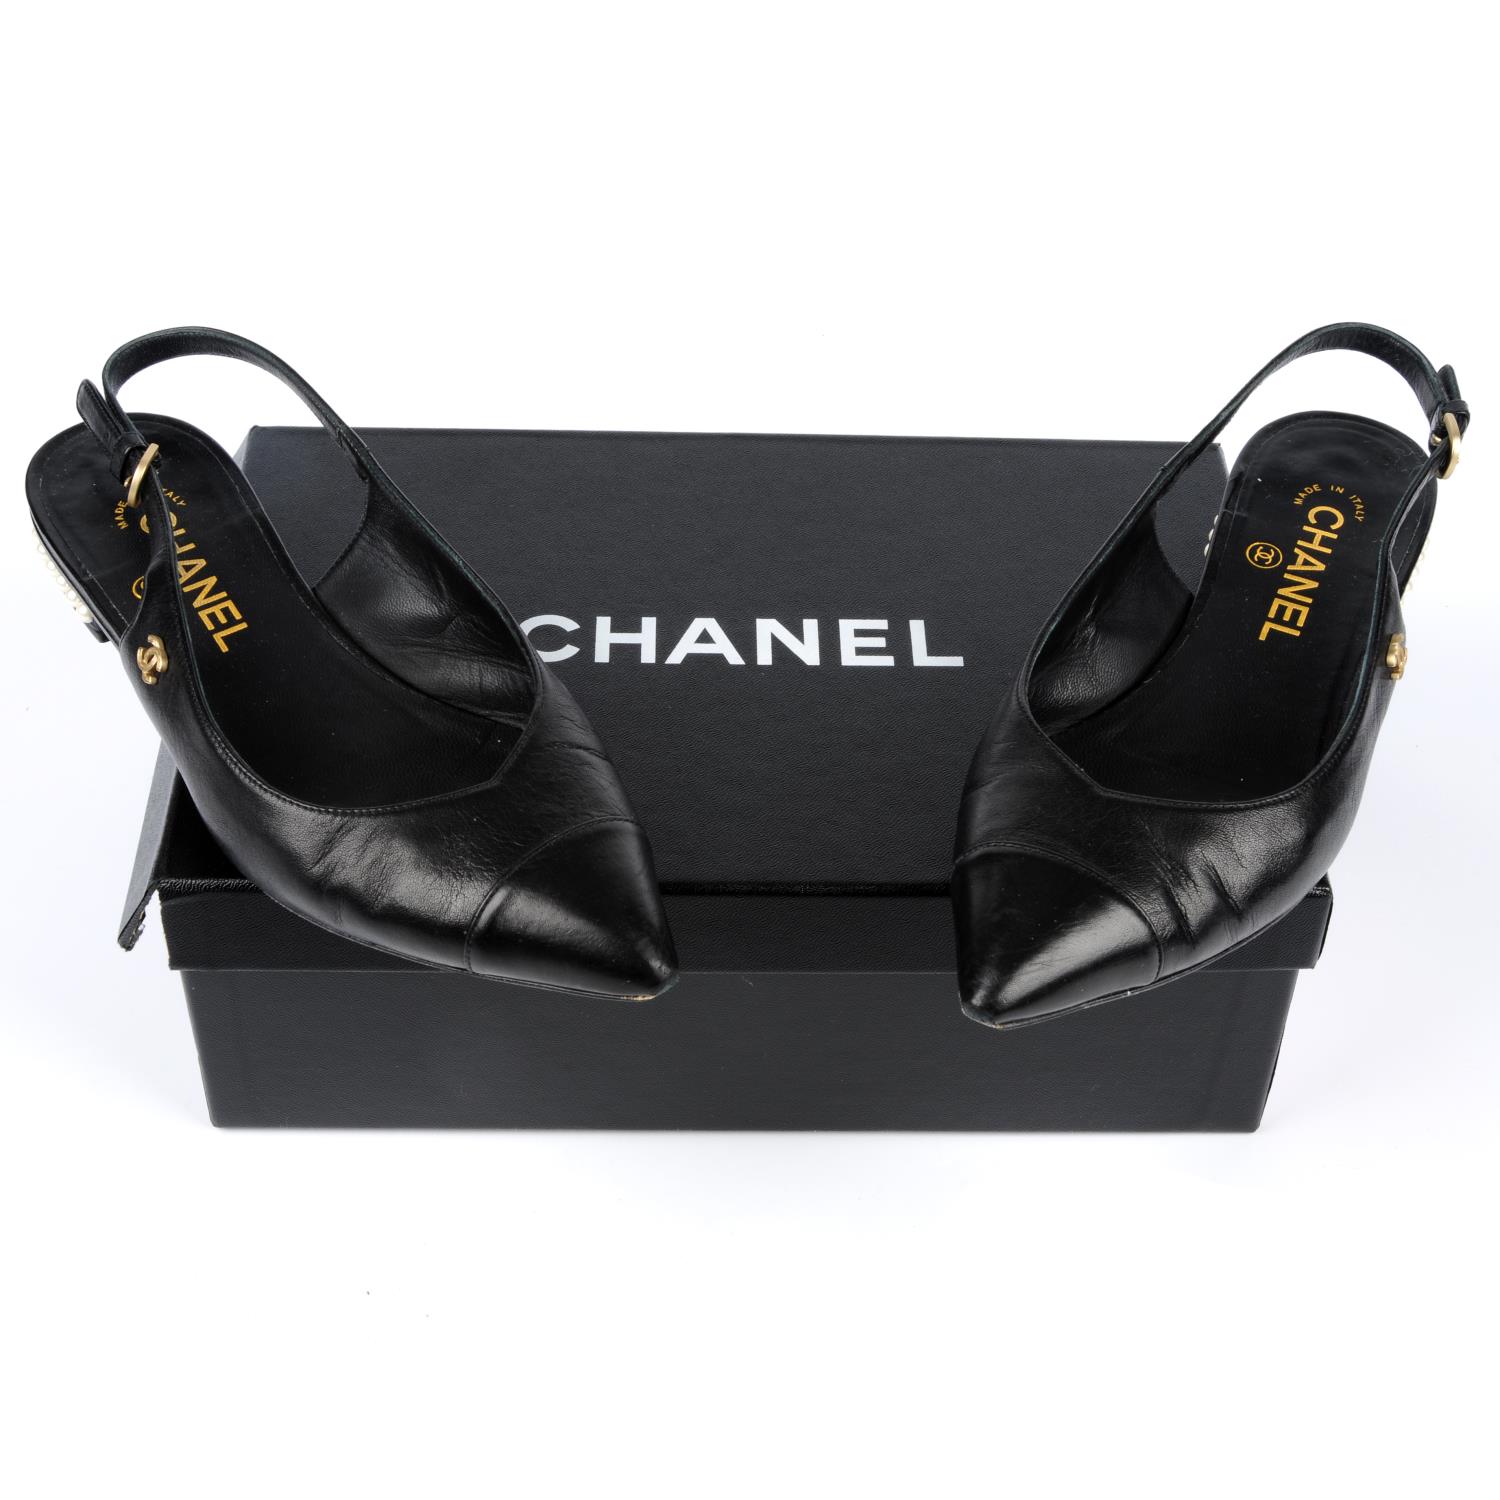 CHANEL - a pair of black leather slingback sandals. - Image 5 of 5